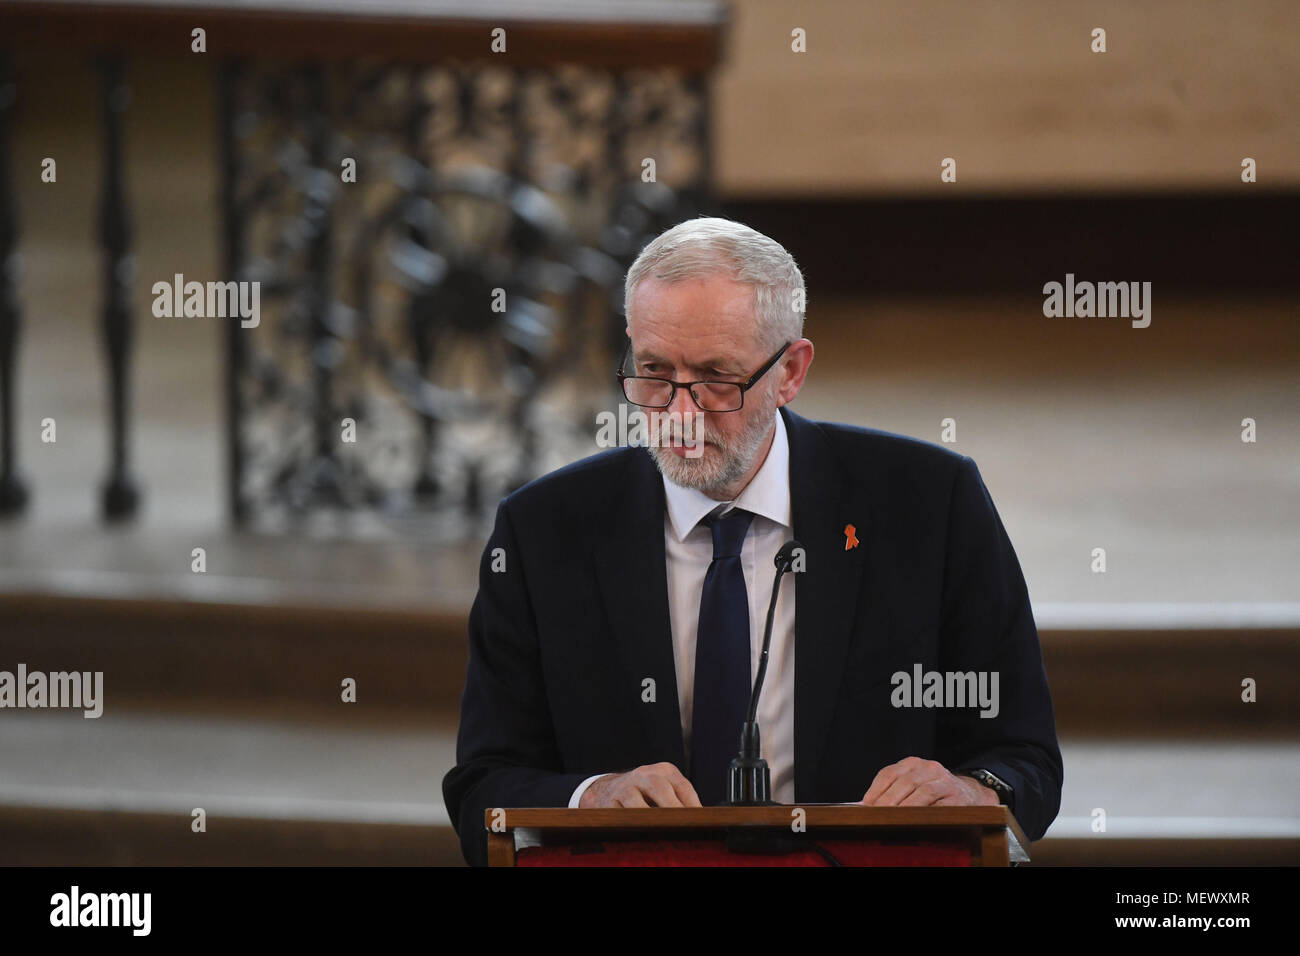 Labour leader Jeremy Corbyn speaking during the memorial service at St Martin-in-the-Fields in Trafalgar Square, London to commemorate the 25th anniversary of the murder of Stephen Lawrence. Stock Photo